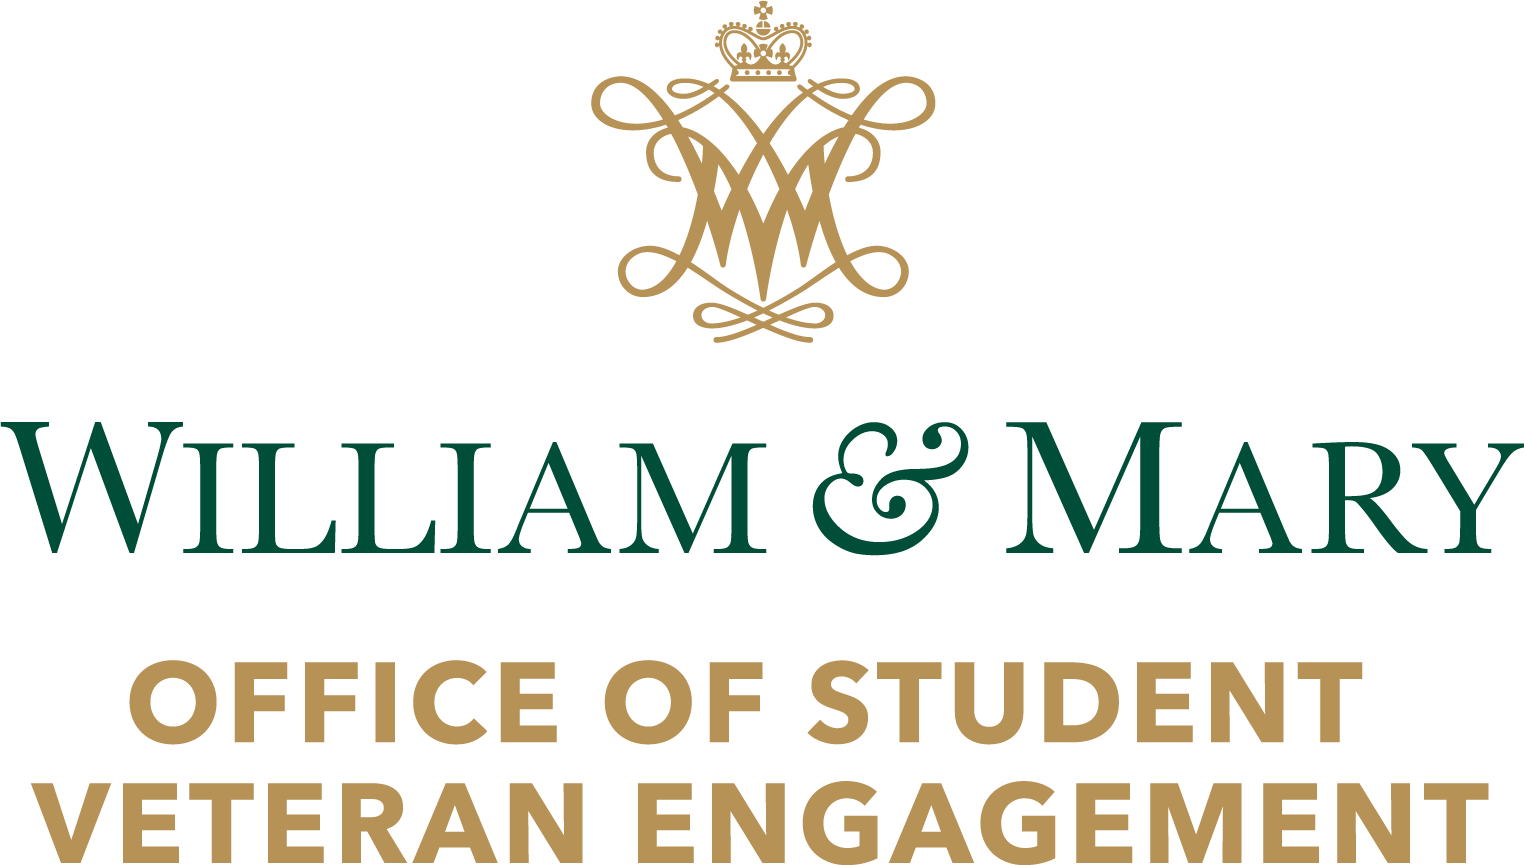 office-of-student-veteran-engagement-logo.png